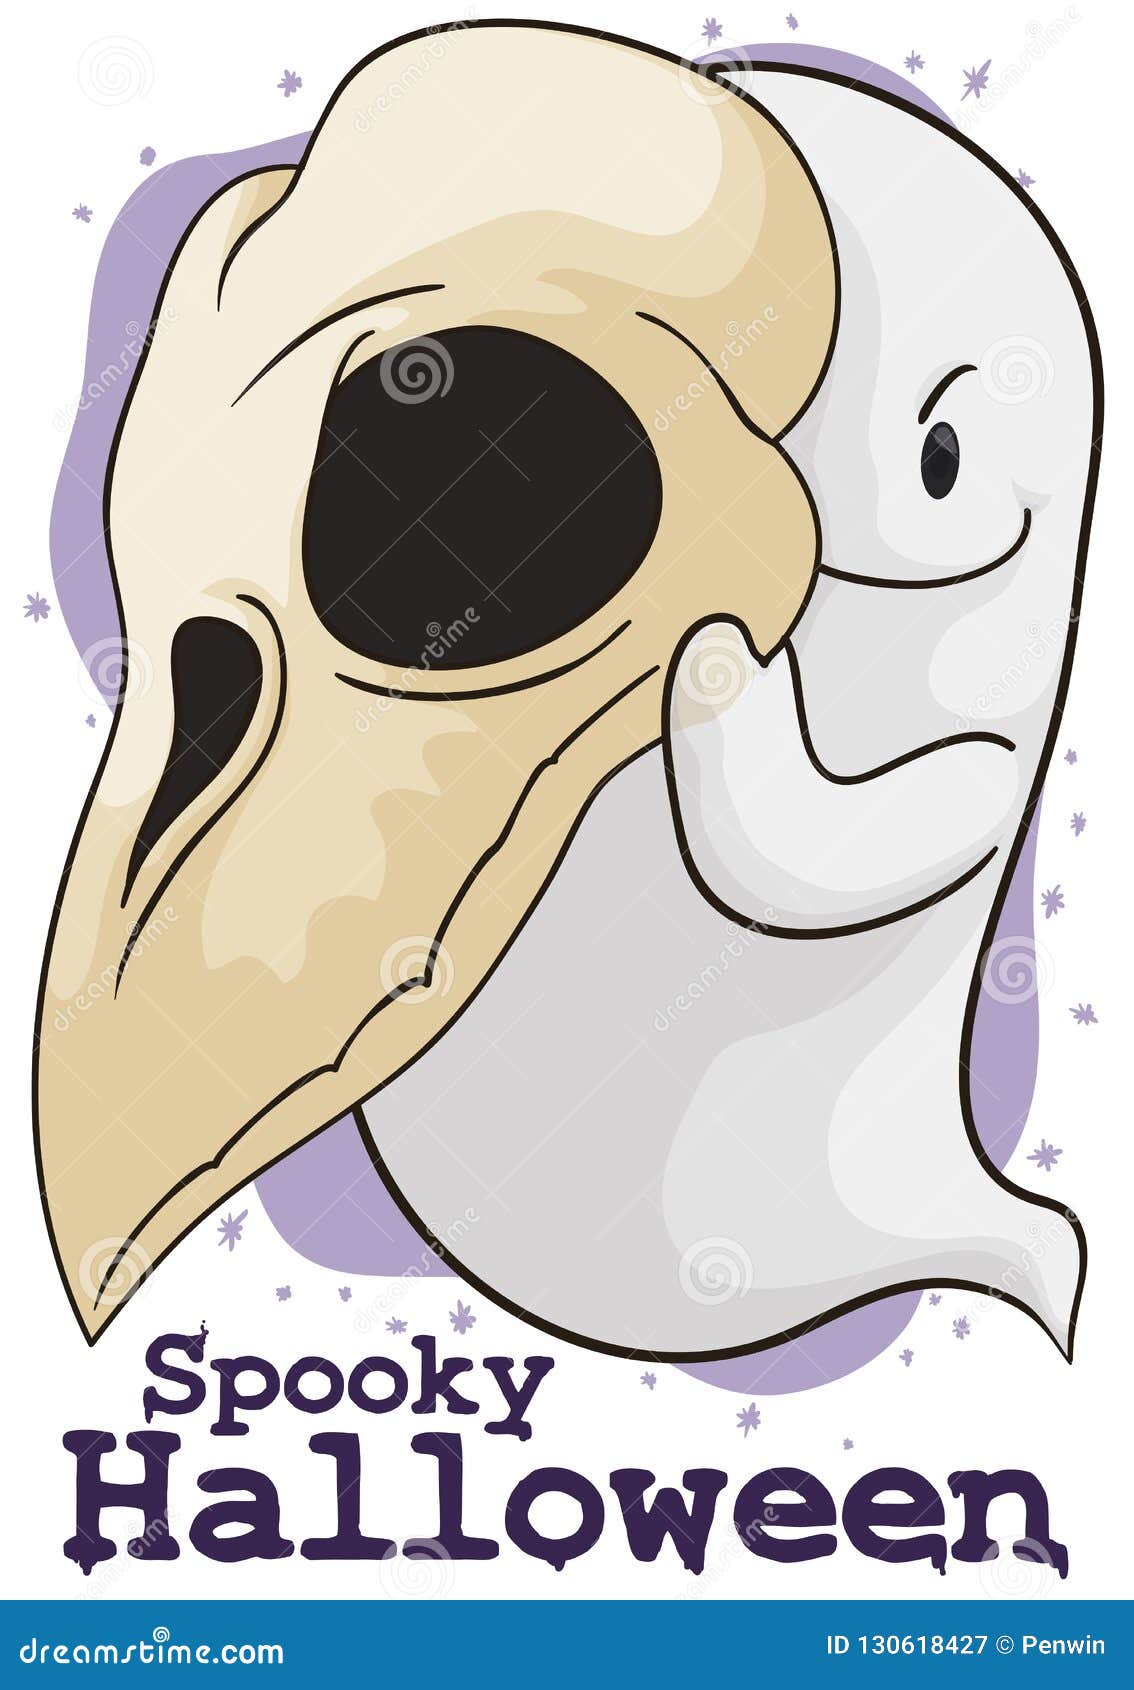 Ghost Skull Clipart Transparent Background, Cartoon Ghost Head Skull Pass,  Emoticons, Funny, Skull Illustration PNG Image For Free Download